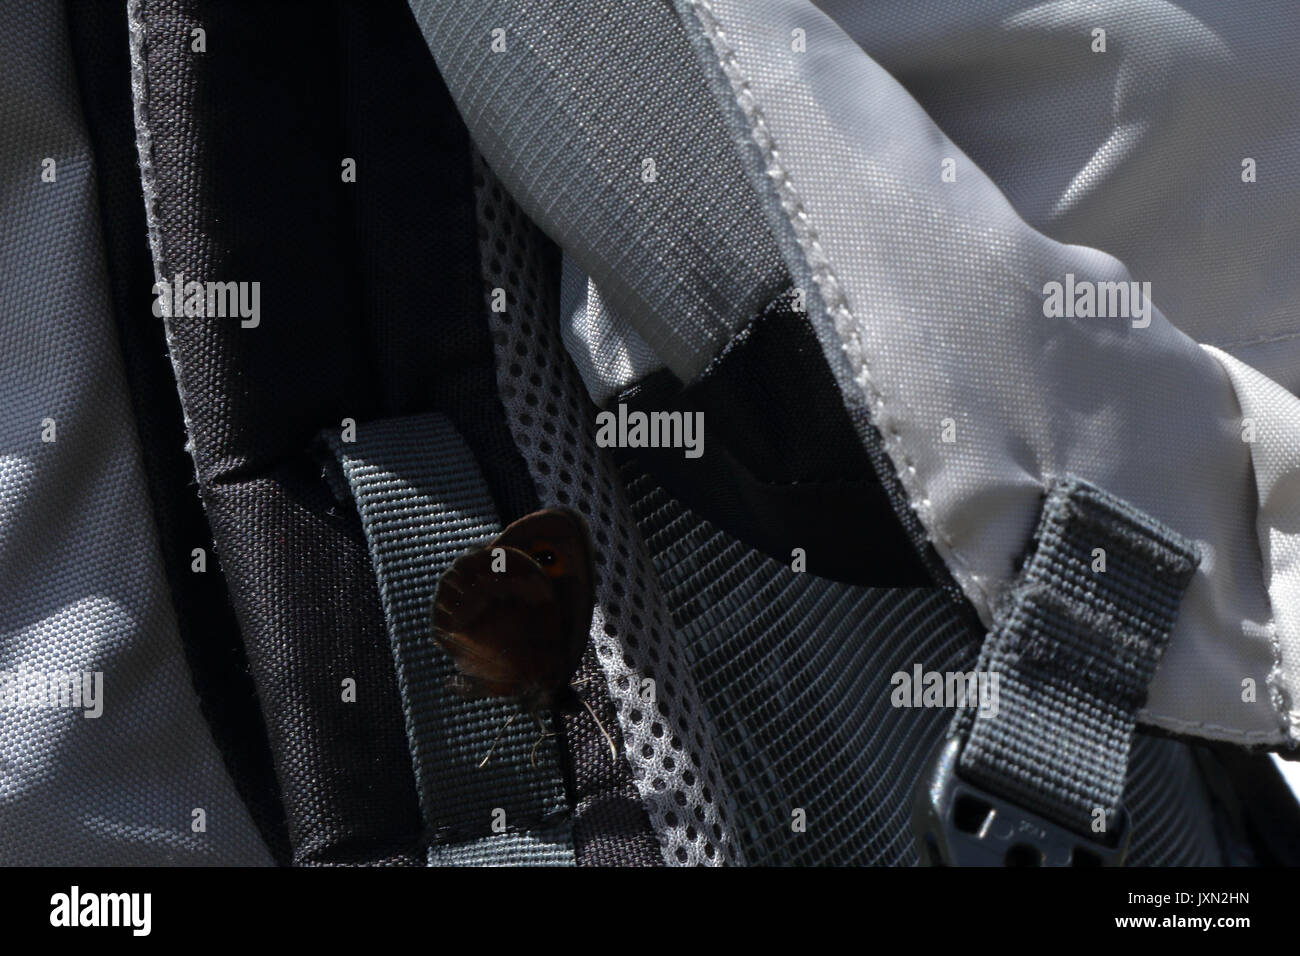 A dark brown butterfly perched on the strap of a dark grey bagpack Stock Photo